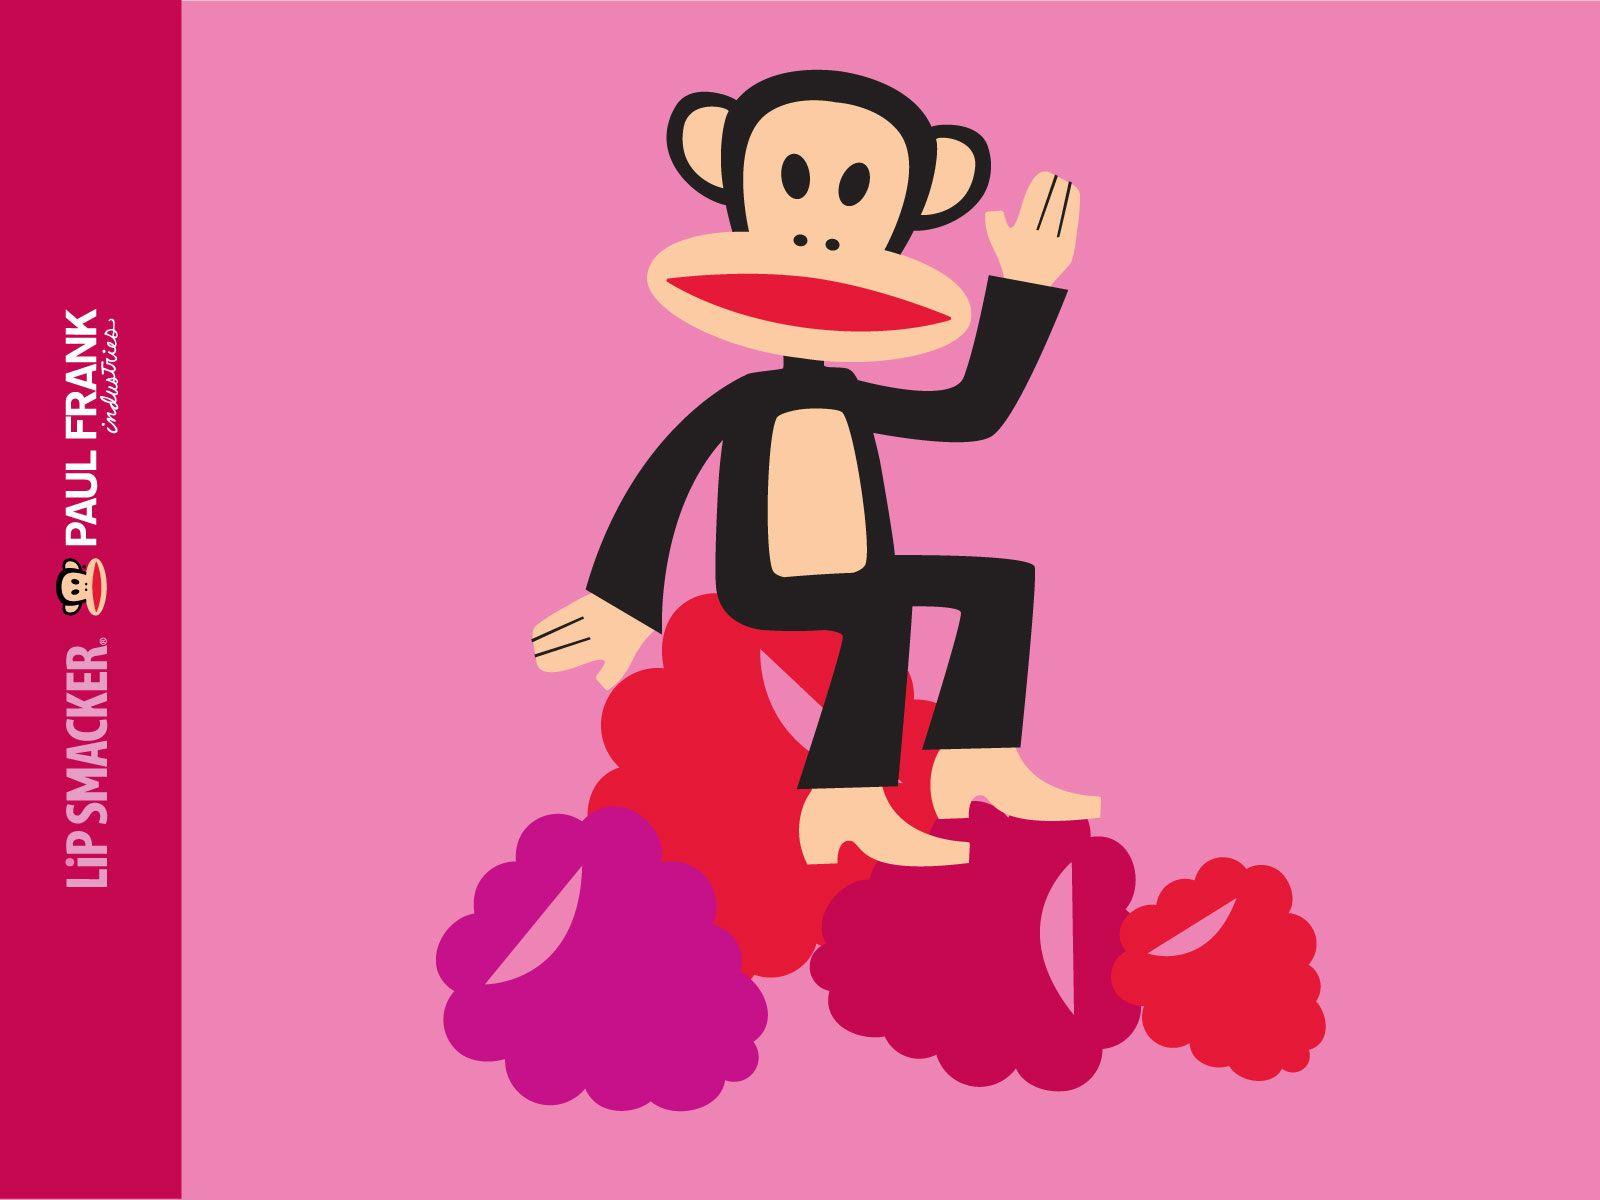 image about Paul Frank. See more about paul